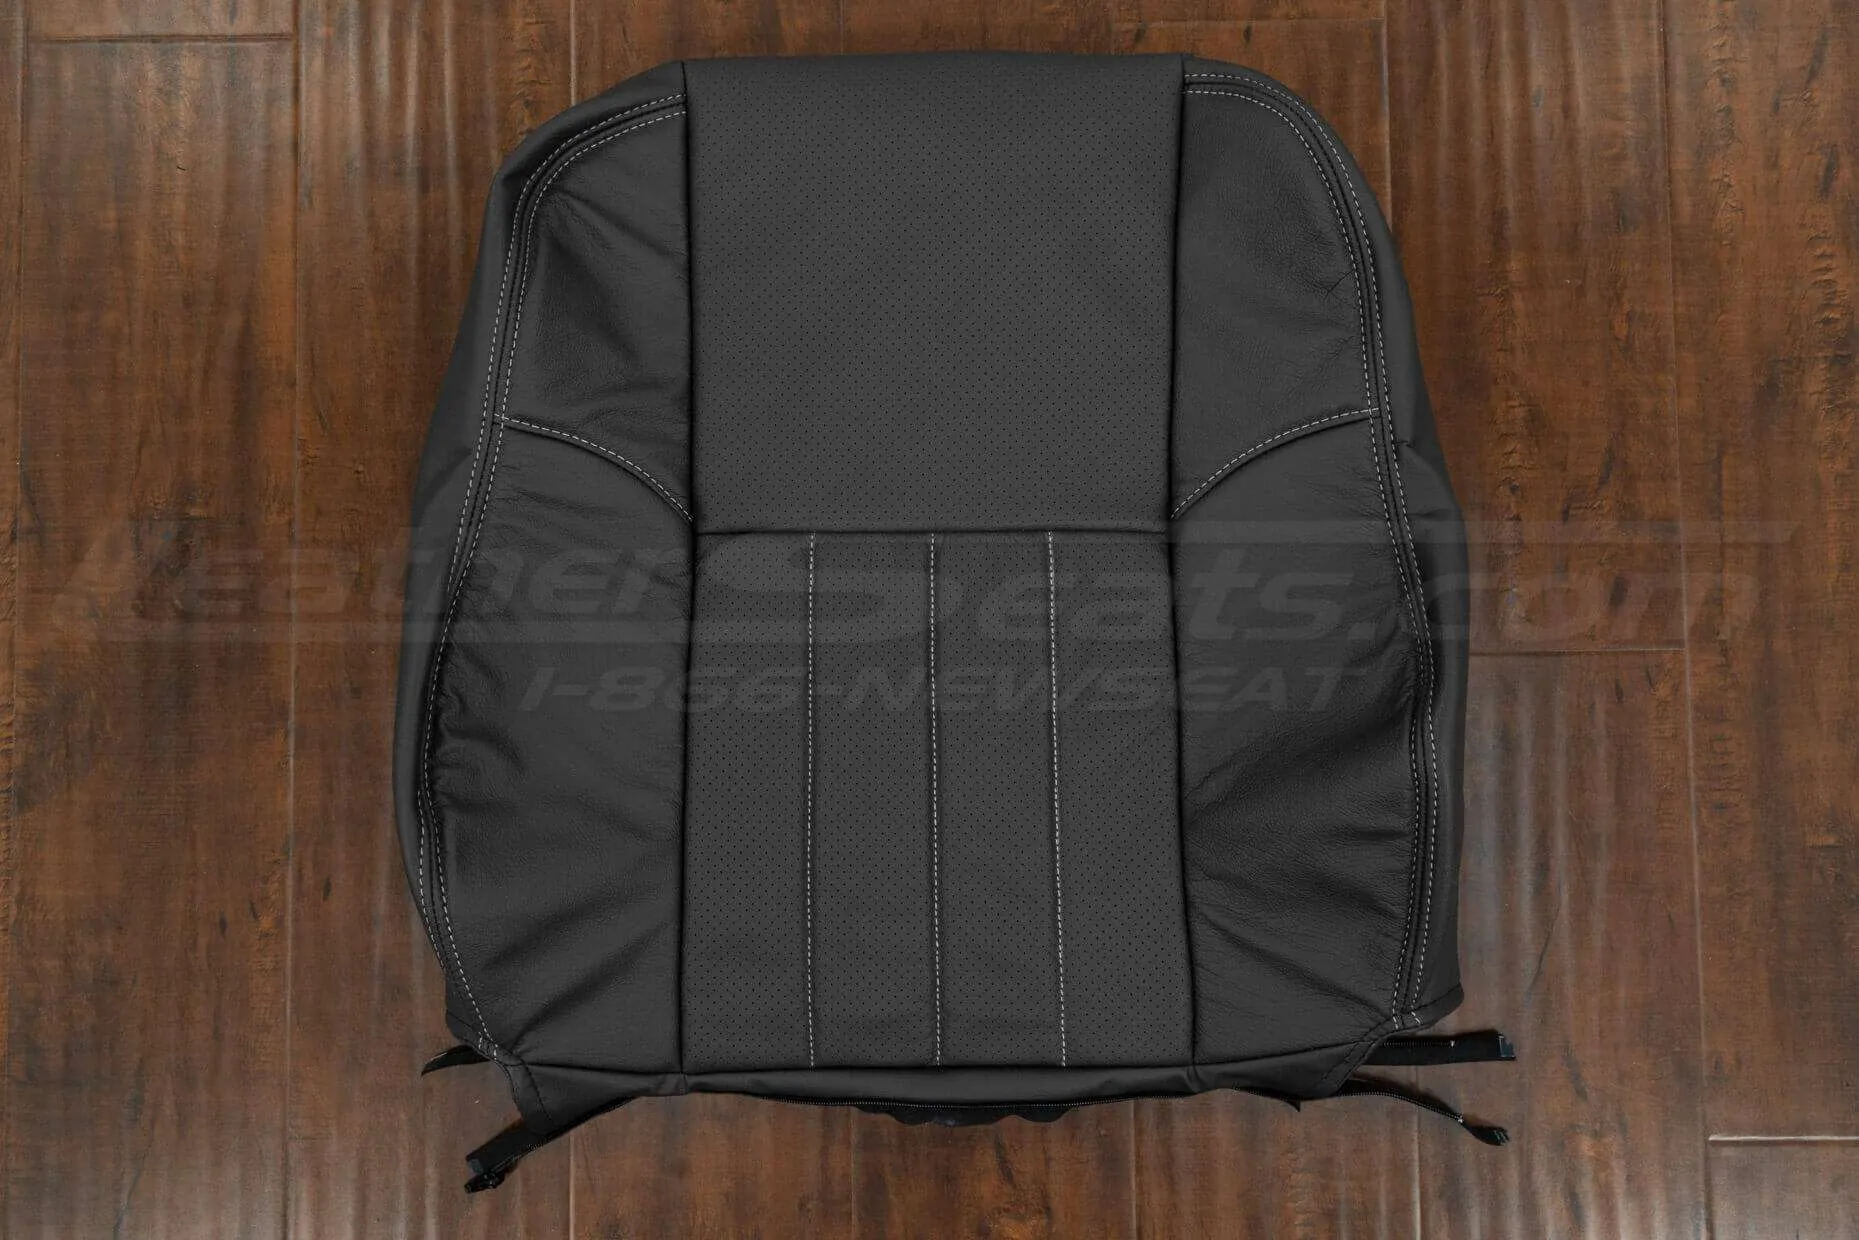 Jeep Grand Cherokee Backrest upholstery in Dark Graphite with Perforated Body